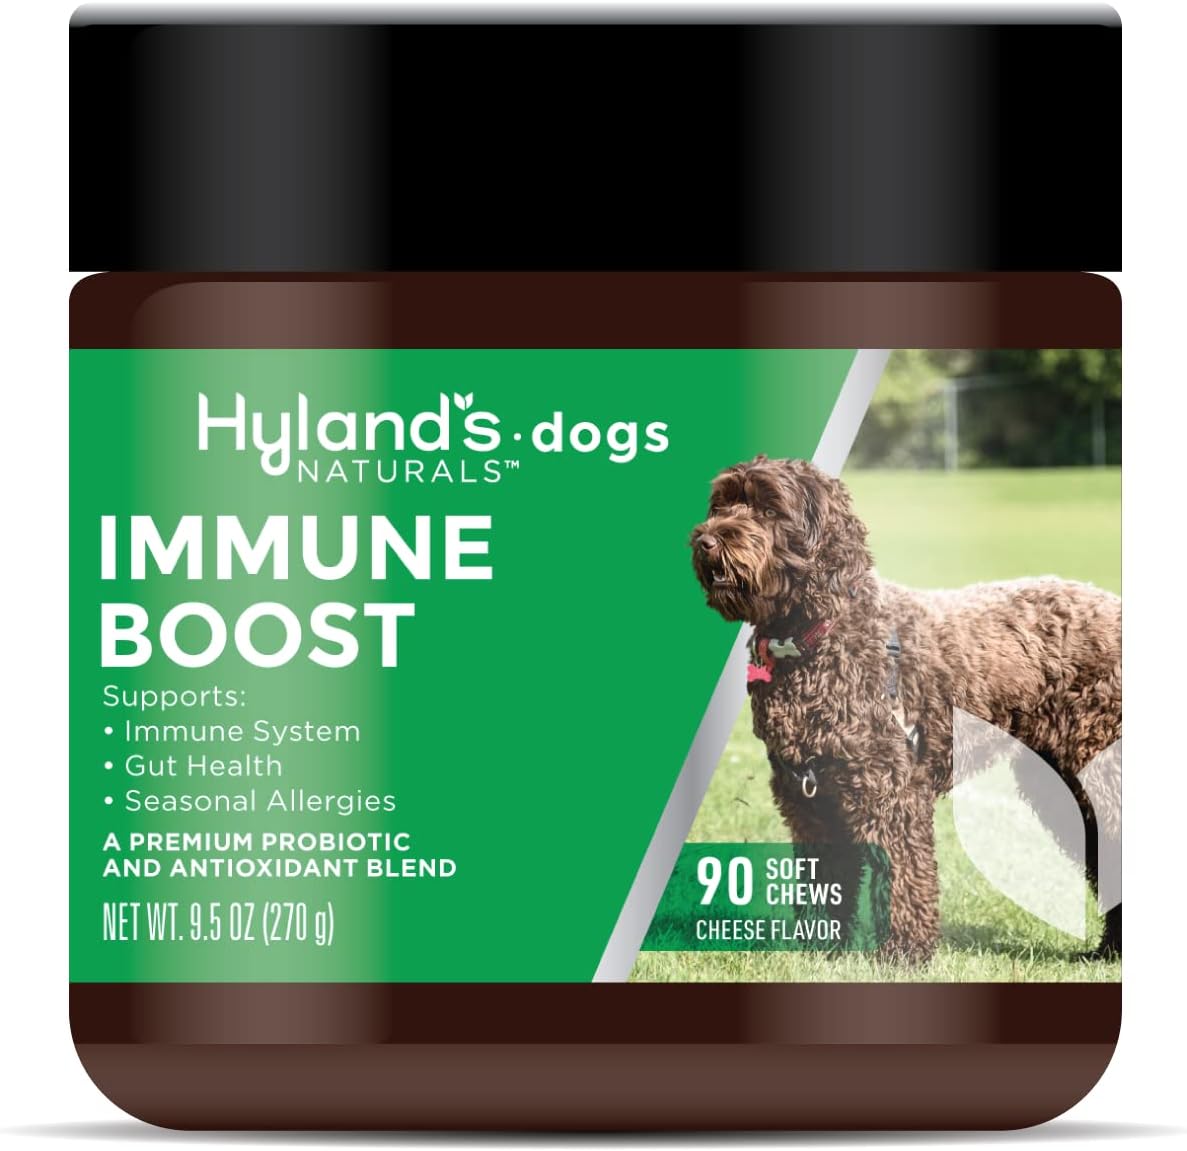 Hyland's Naturals - Immune Boost for Dogs, 90 Soft Chews, Supports Immune System, Gut Health & Seasonal Allergies, with Probiotics & Antioxidants, Cheese Flavor